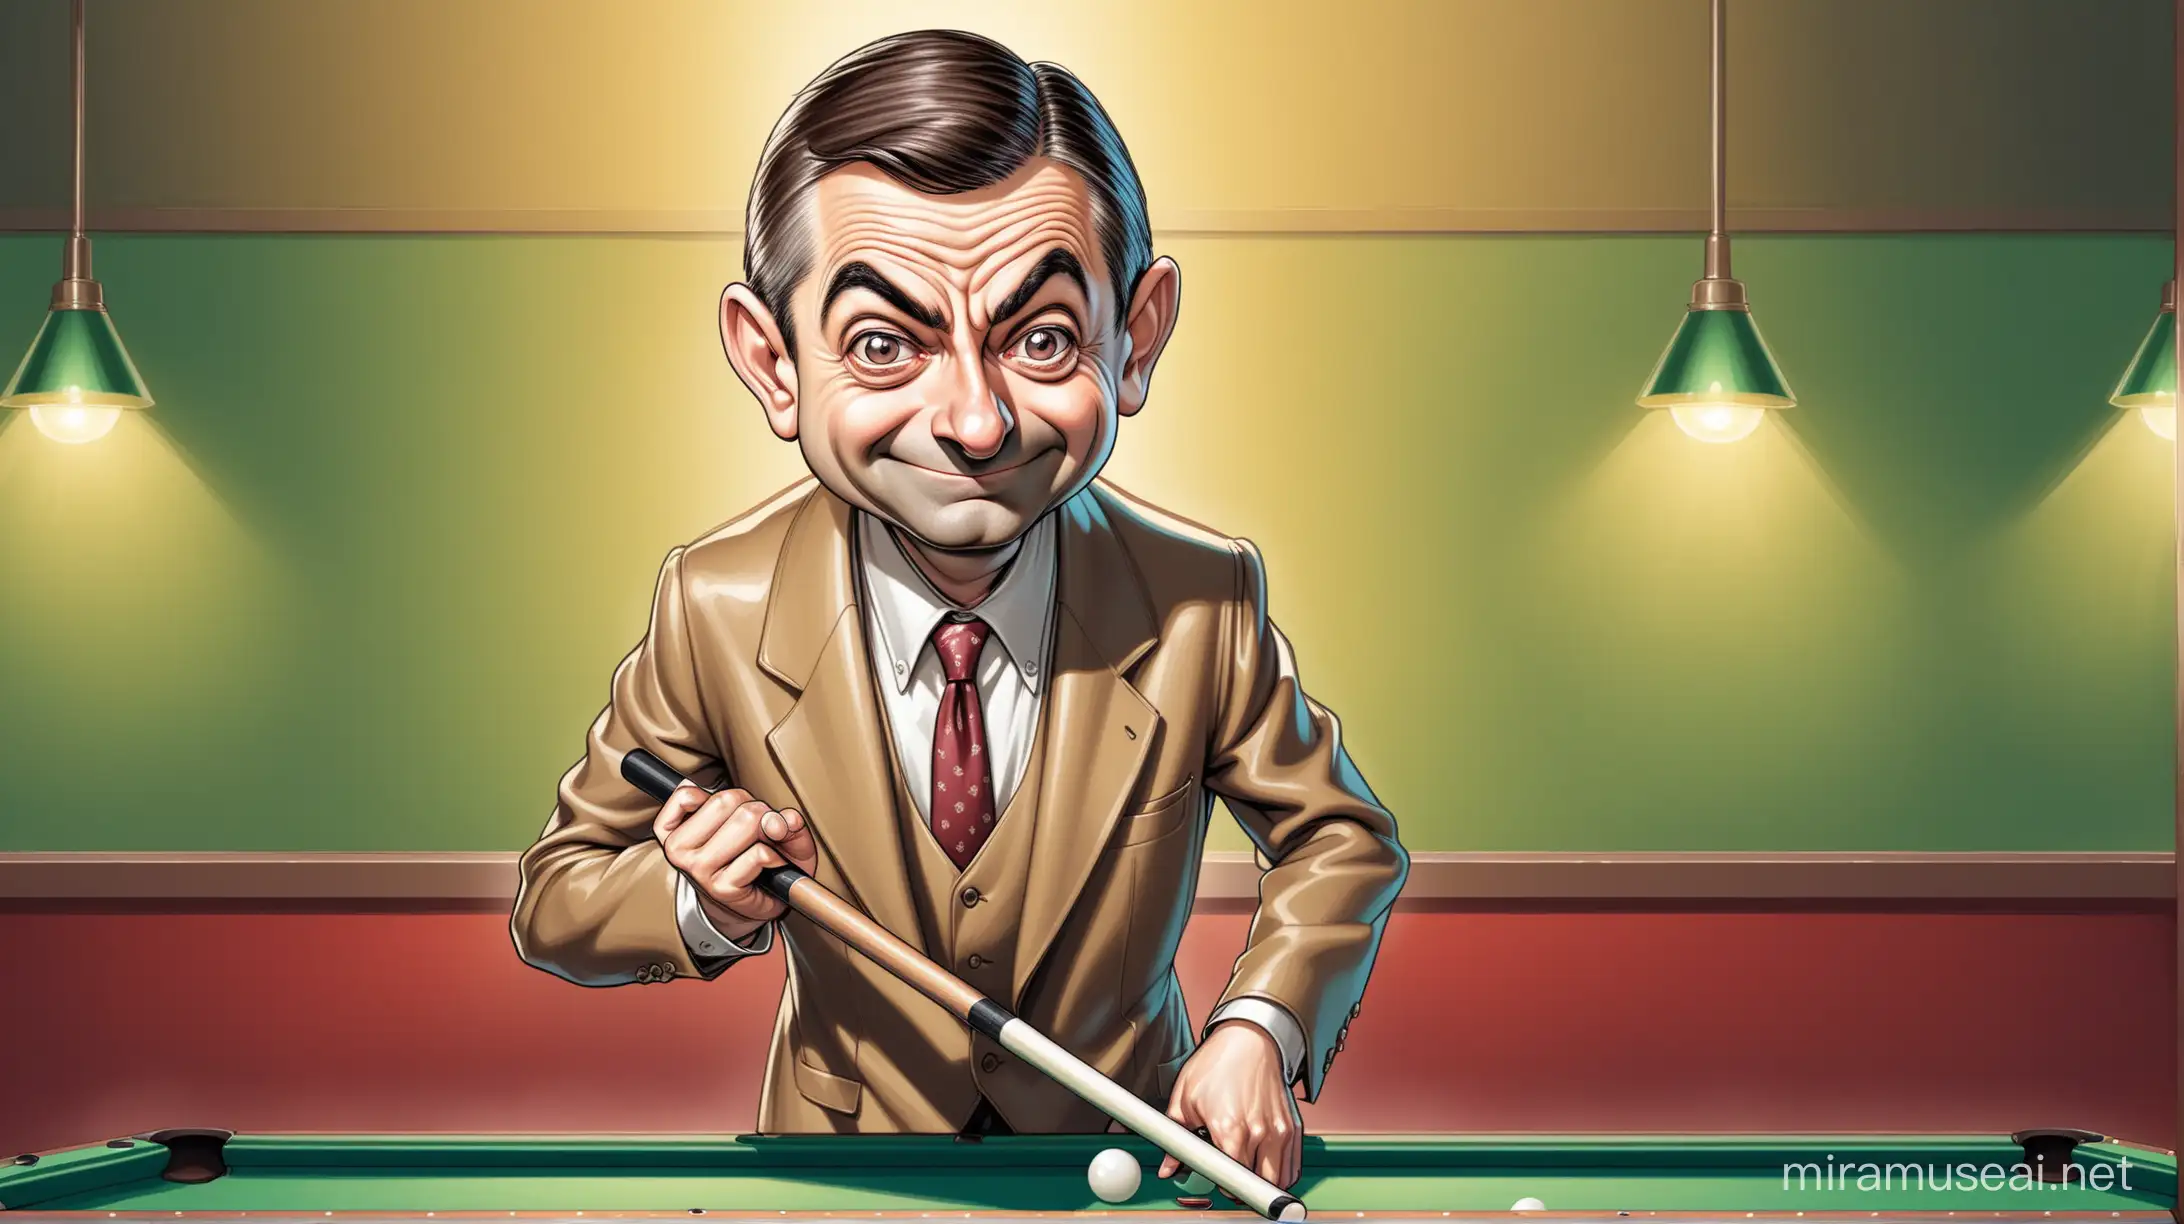 Caricature of mr bean standing behind a pool table with a pool cue in his hand with a smile on his face